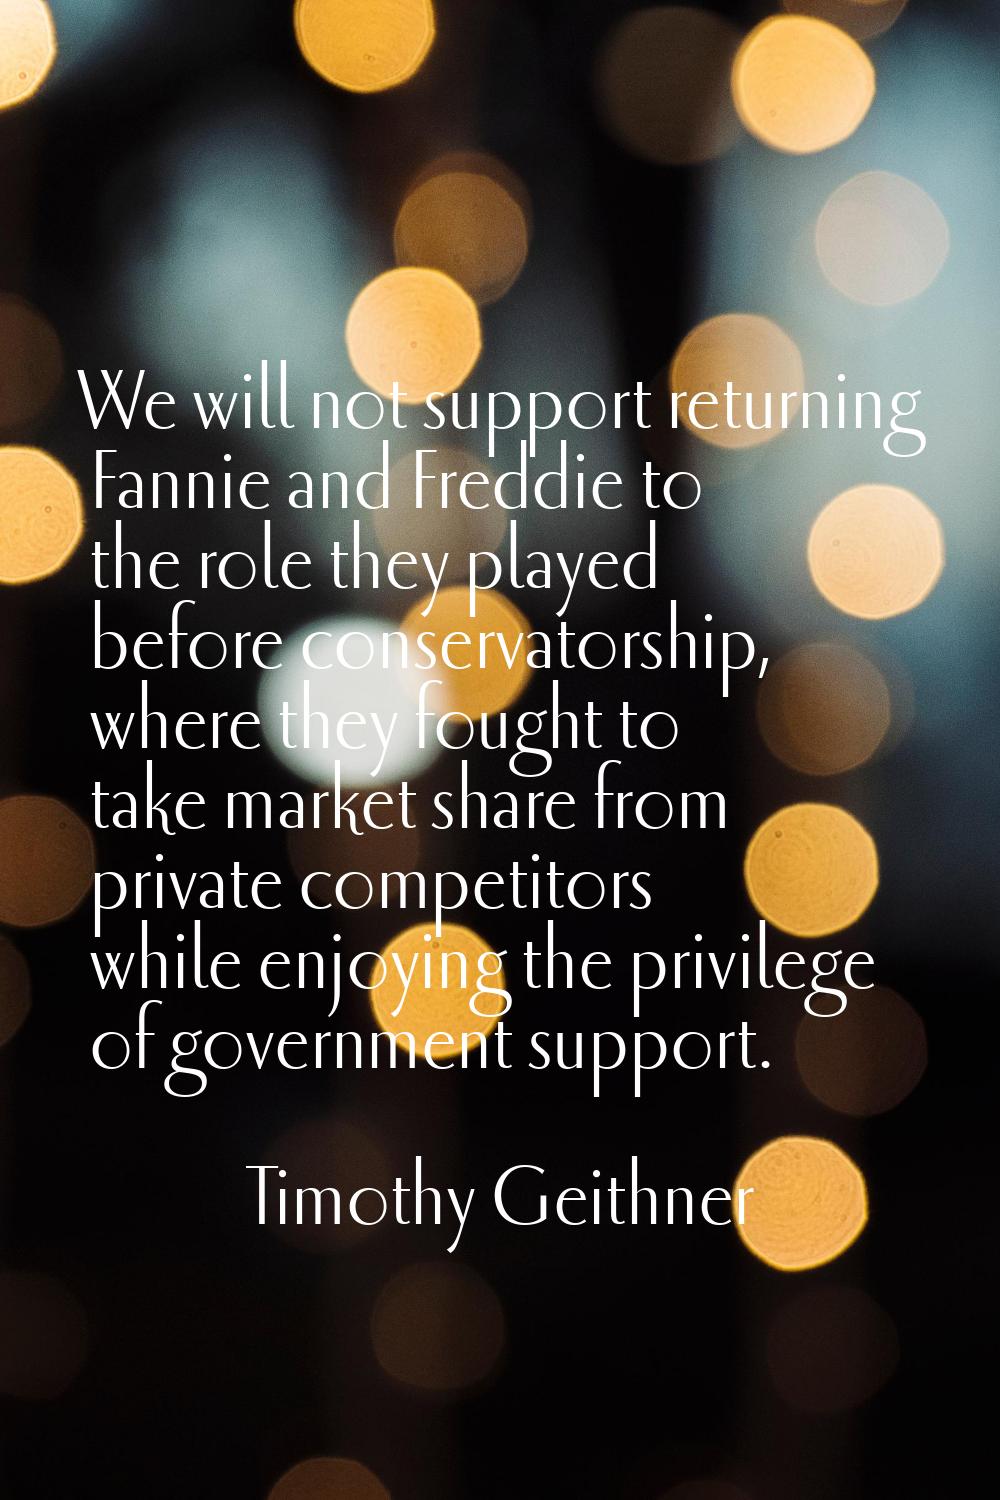 We will not support returning Fannie and Freddie to the role they played before conservatorship, wh